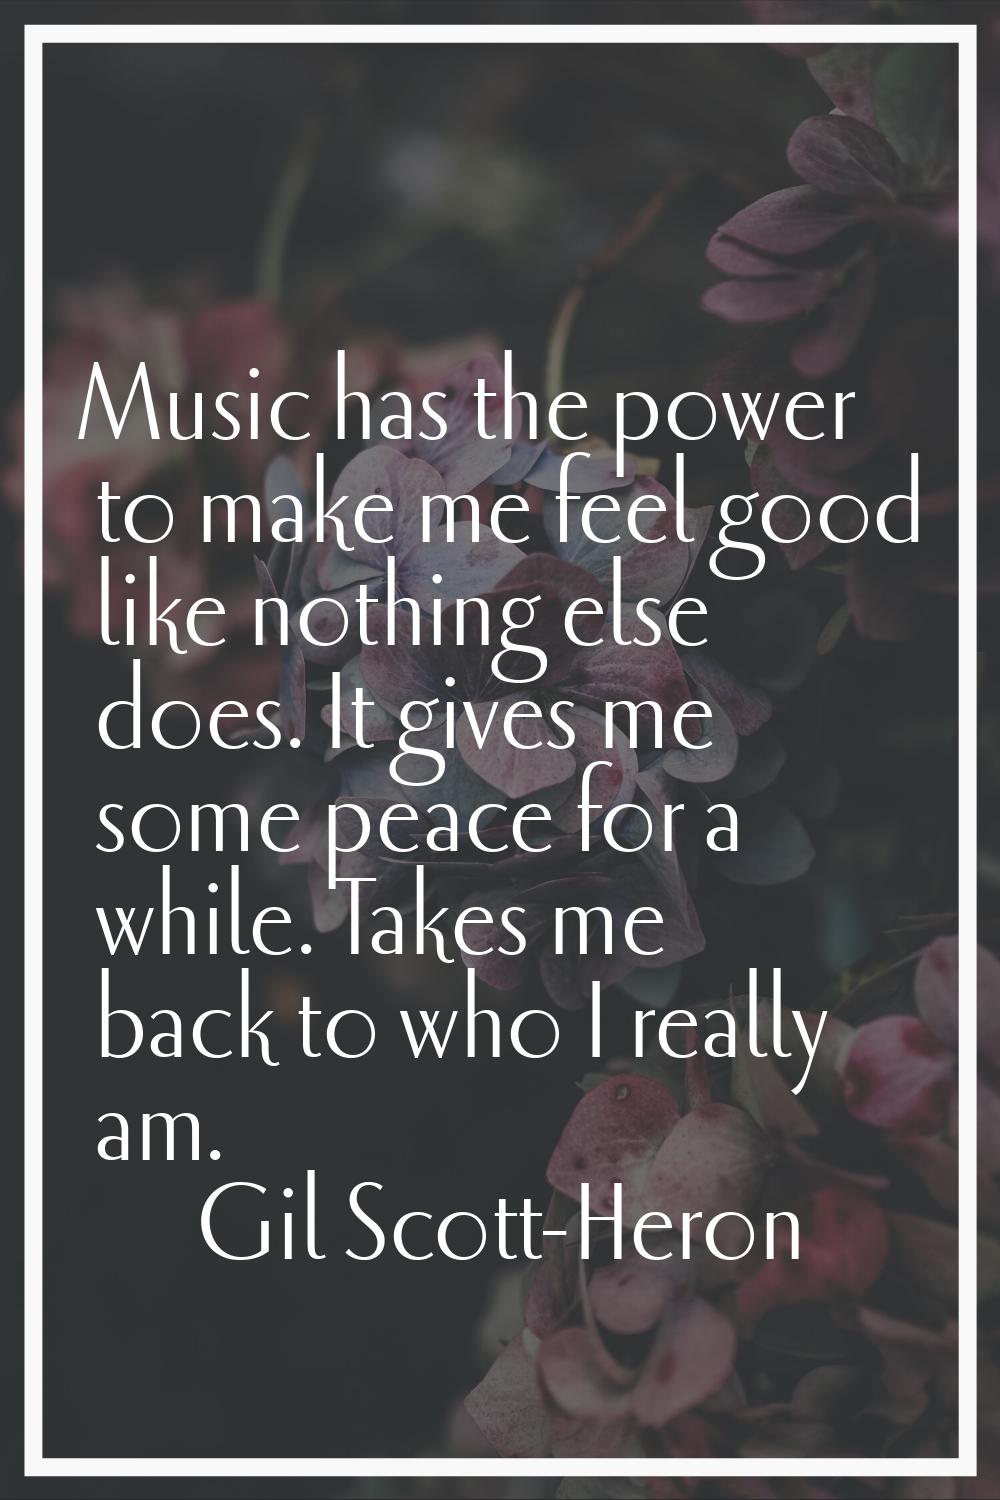 Music has the power to make me feel good like nothing else does. It gives me some peace for a while